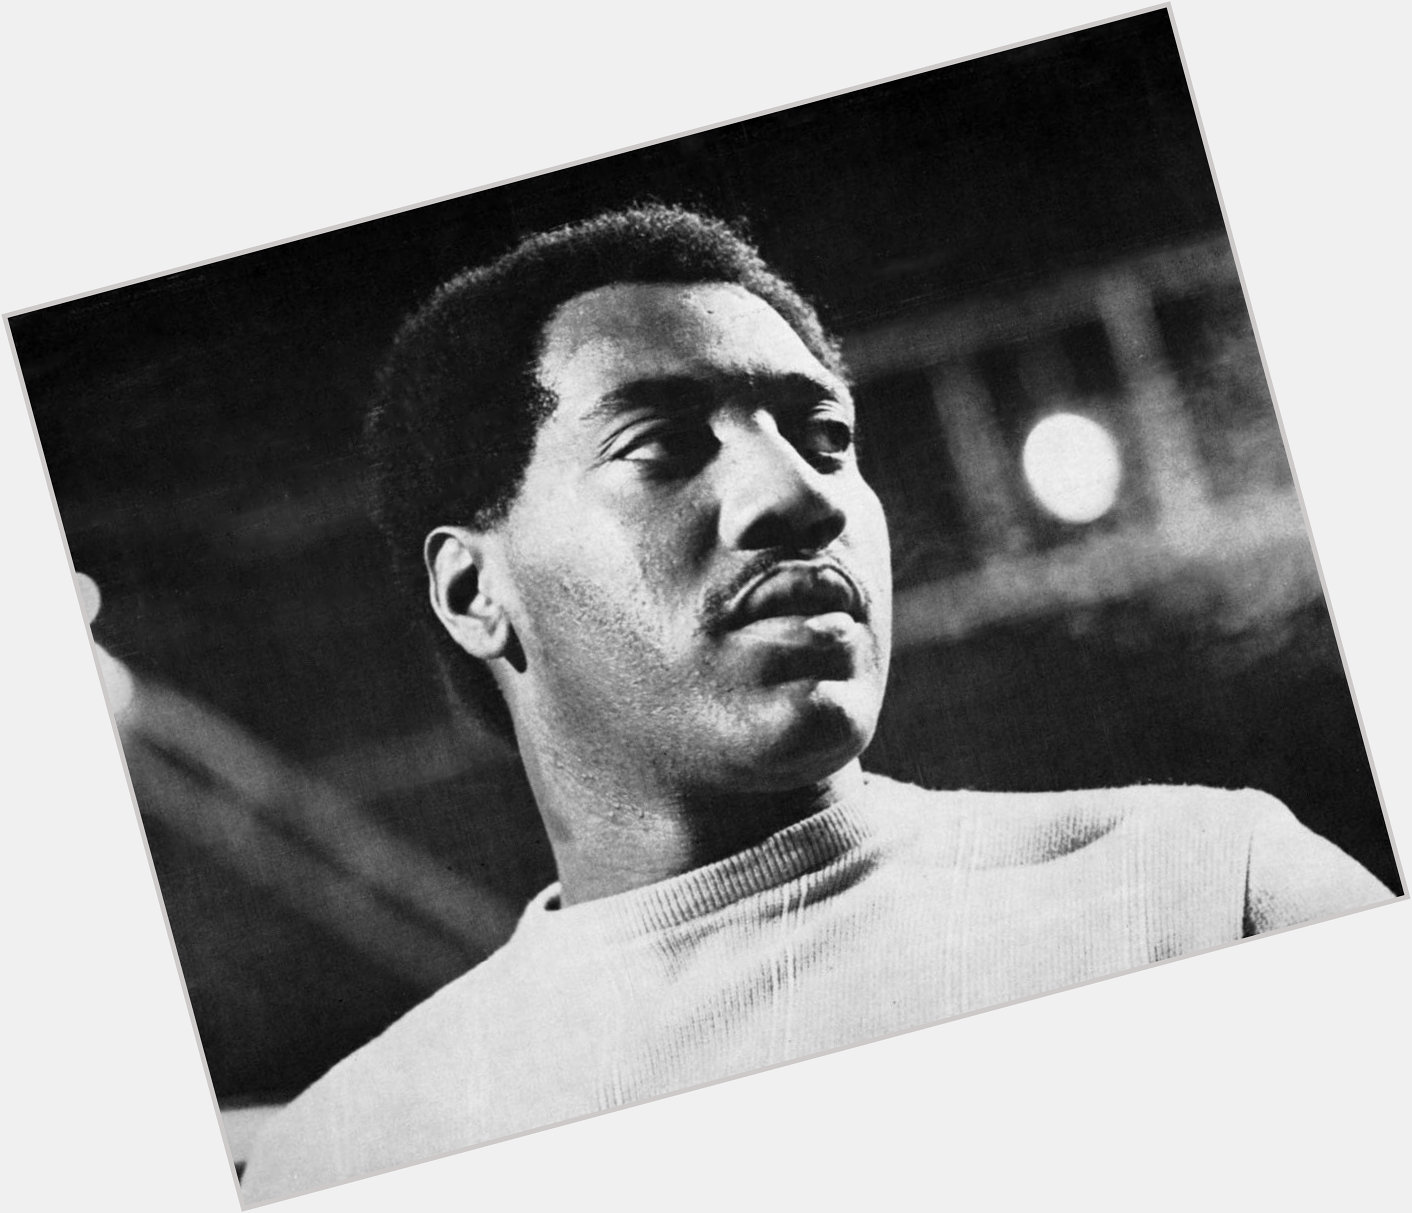 Happy Birthday to Otis Redding, one of the greatest singers of all time. He would have been 80 today. 